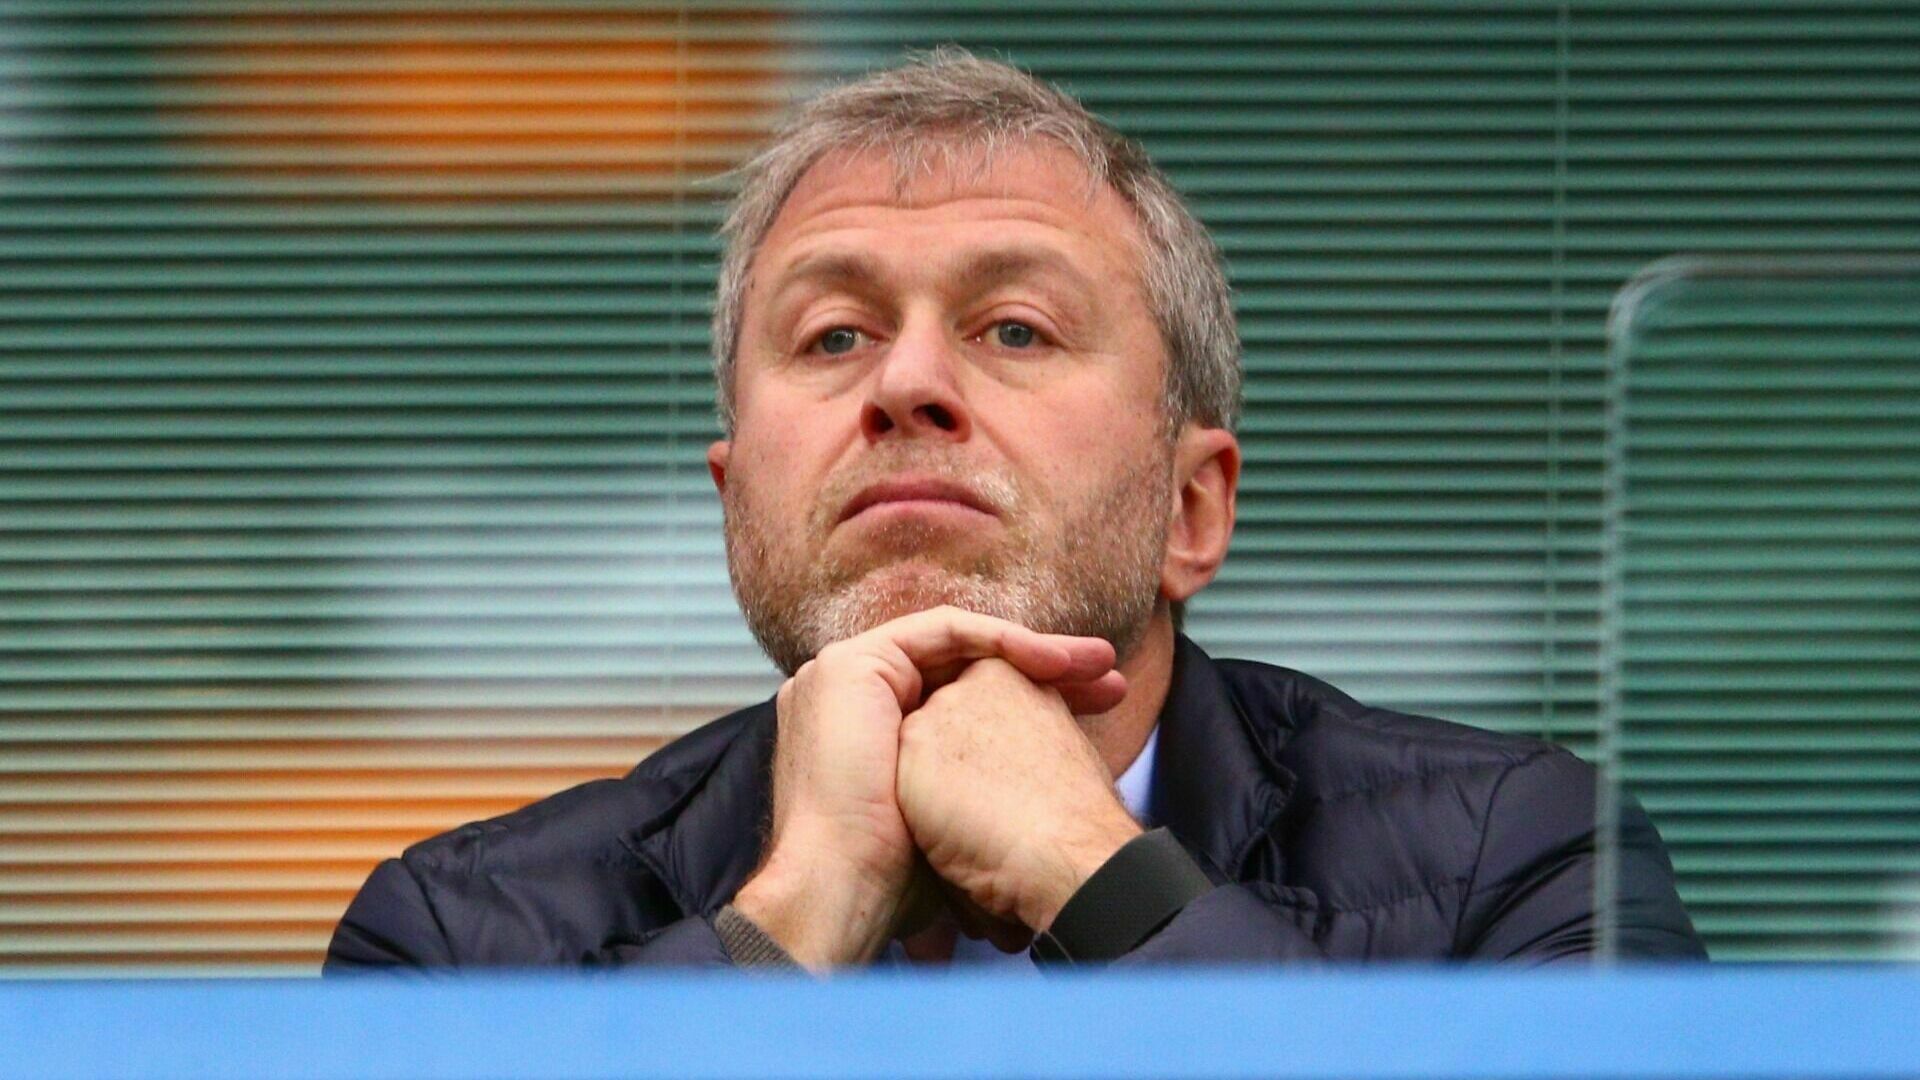 London decided to transfer Abramovich's money from the sale of Chelsea to Ukraine